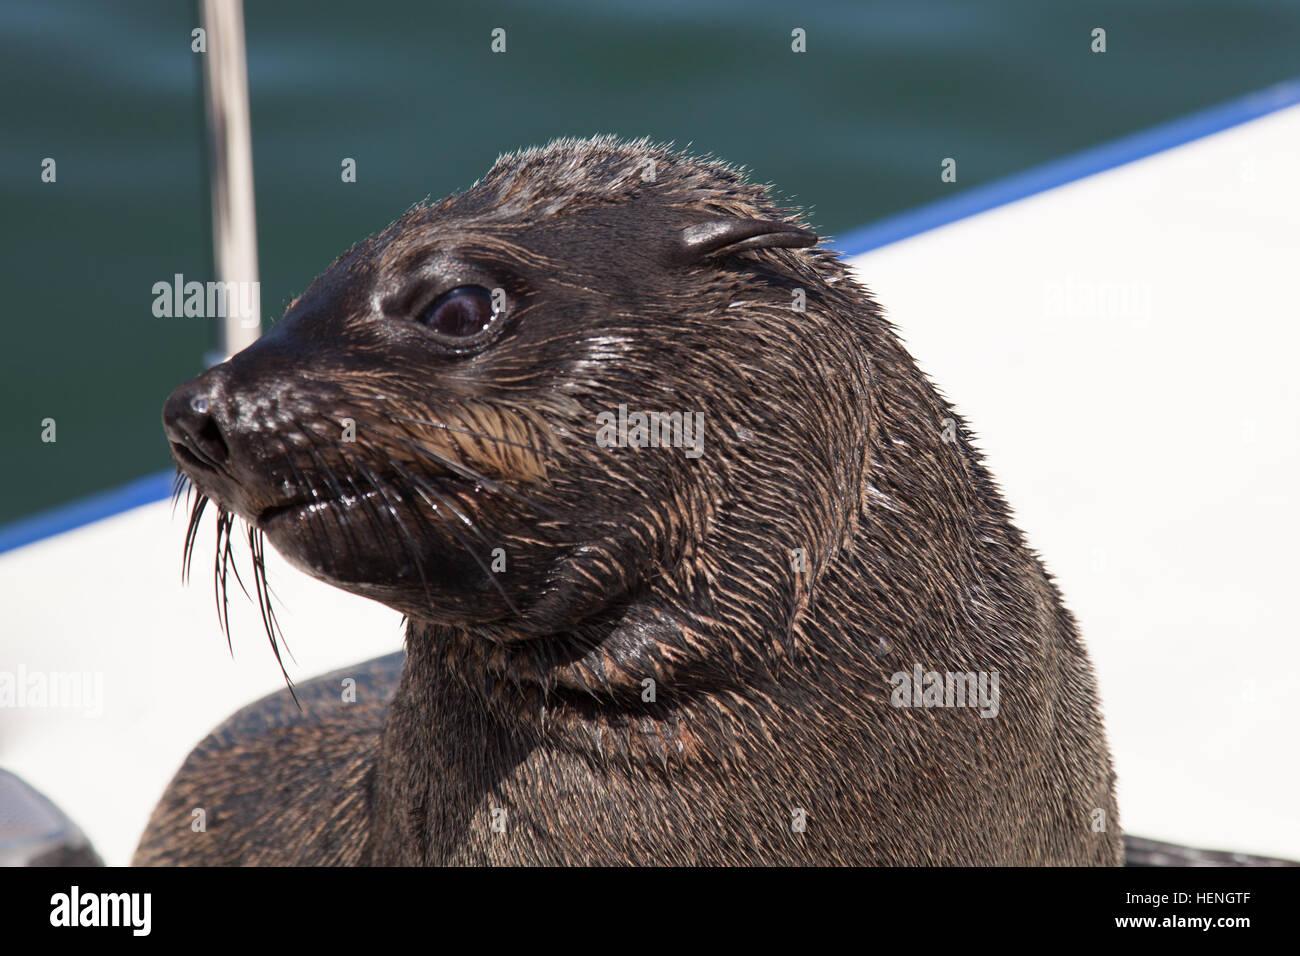 one of huge herd of fur seal swimming near the shore of skeletons in the Atlantic Ocean, South Africa, Namibia. Stock Photo